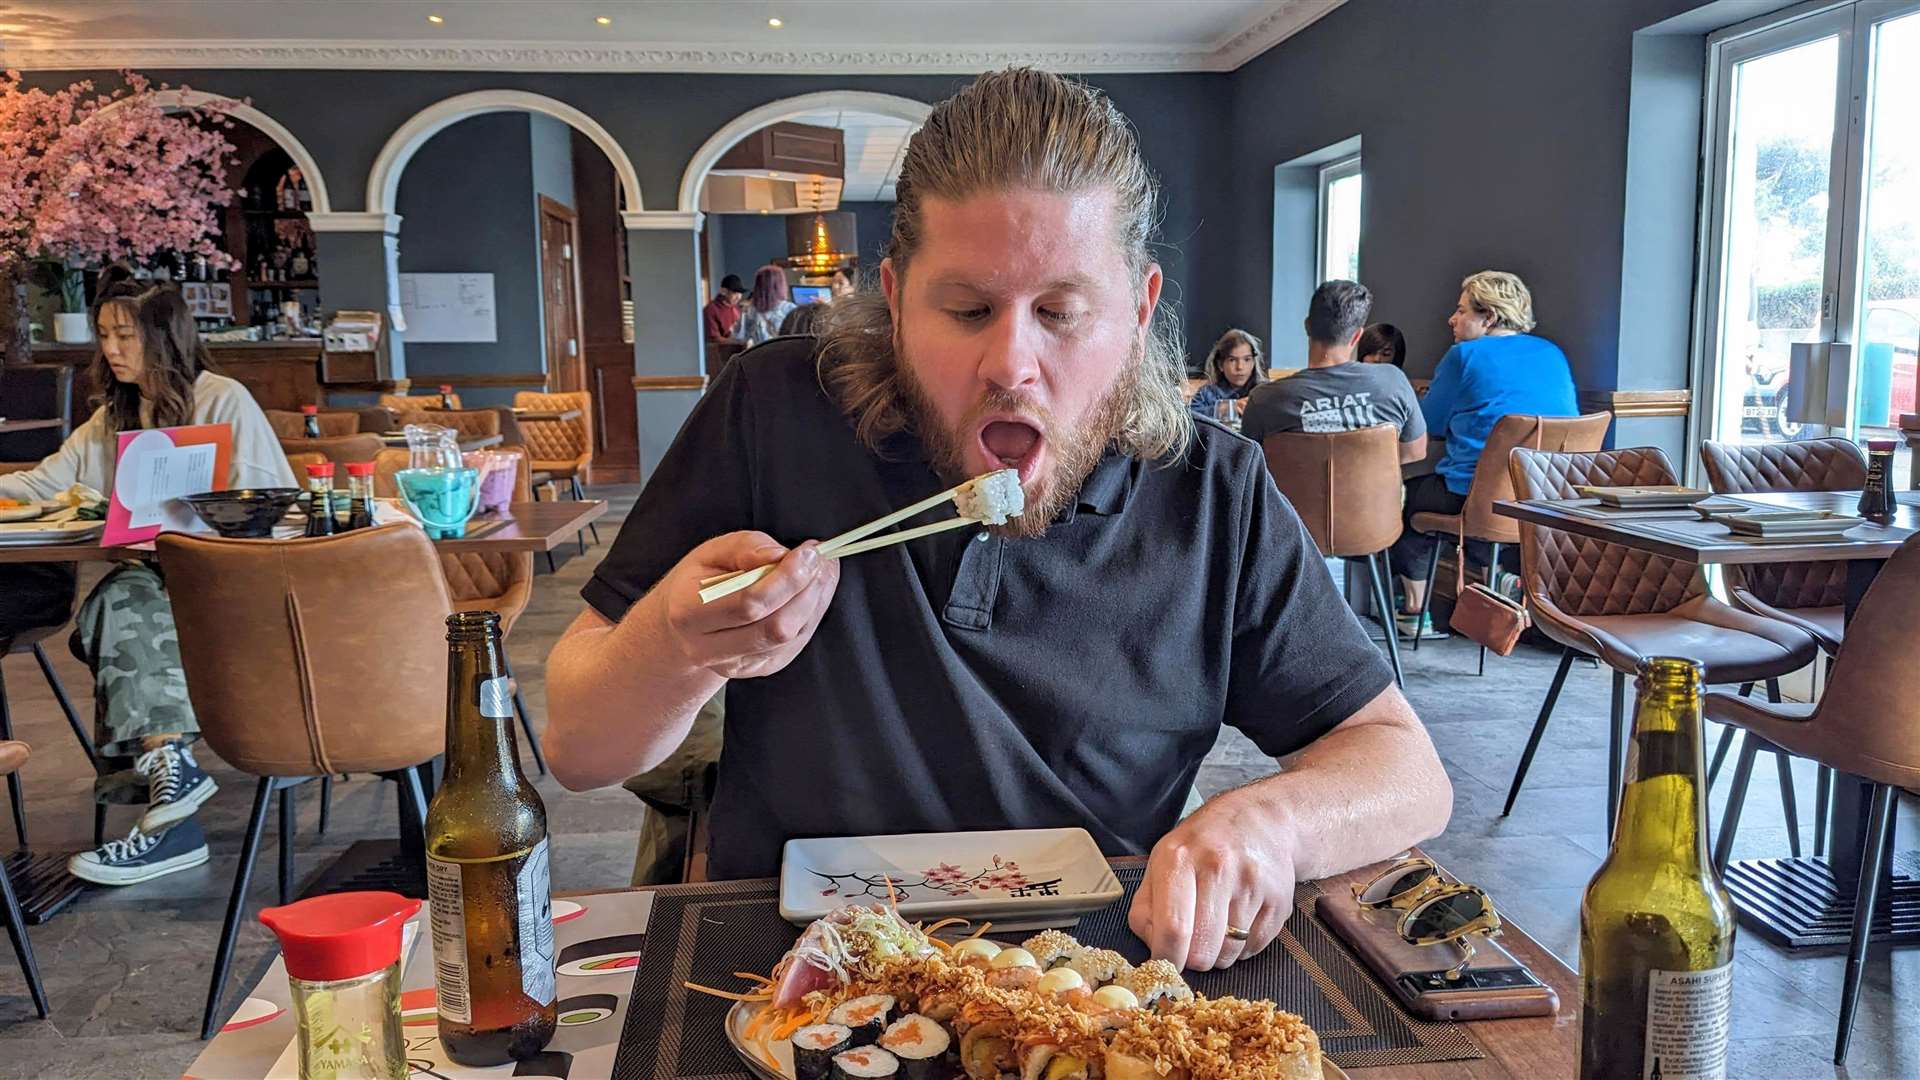 Our man does his best with the chopsticks